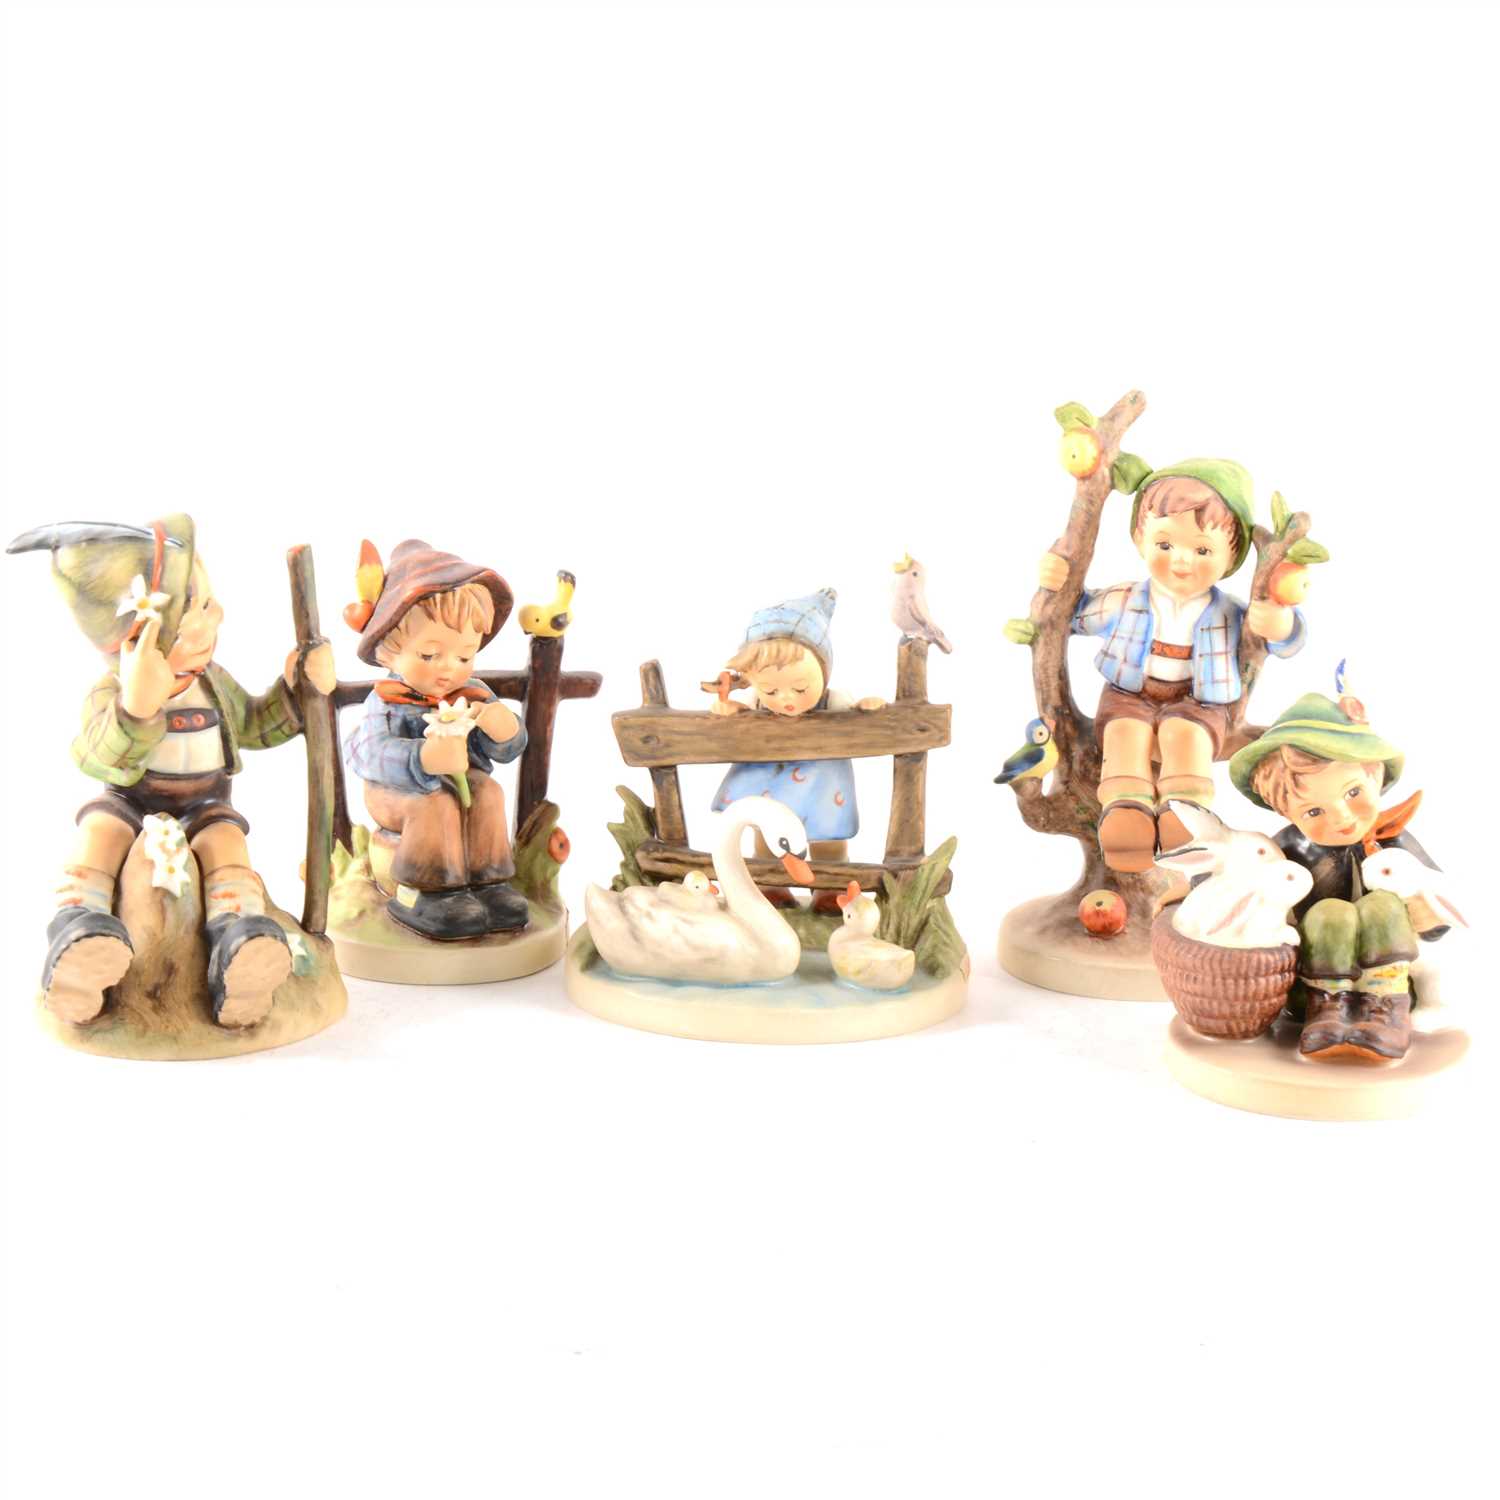 Lot 25 - A collection of Hummel figurines, including Apple Tree, Boy and Girl, ...